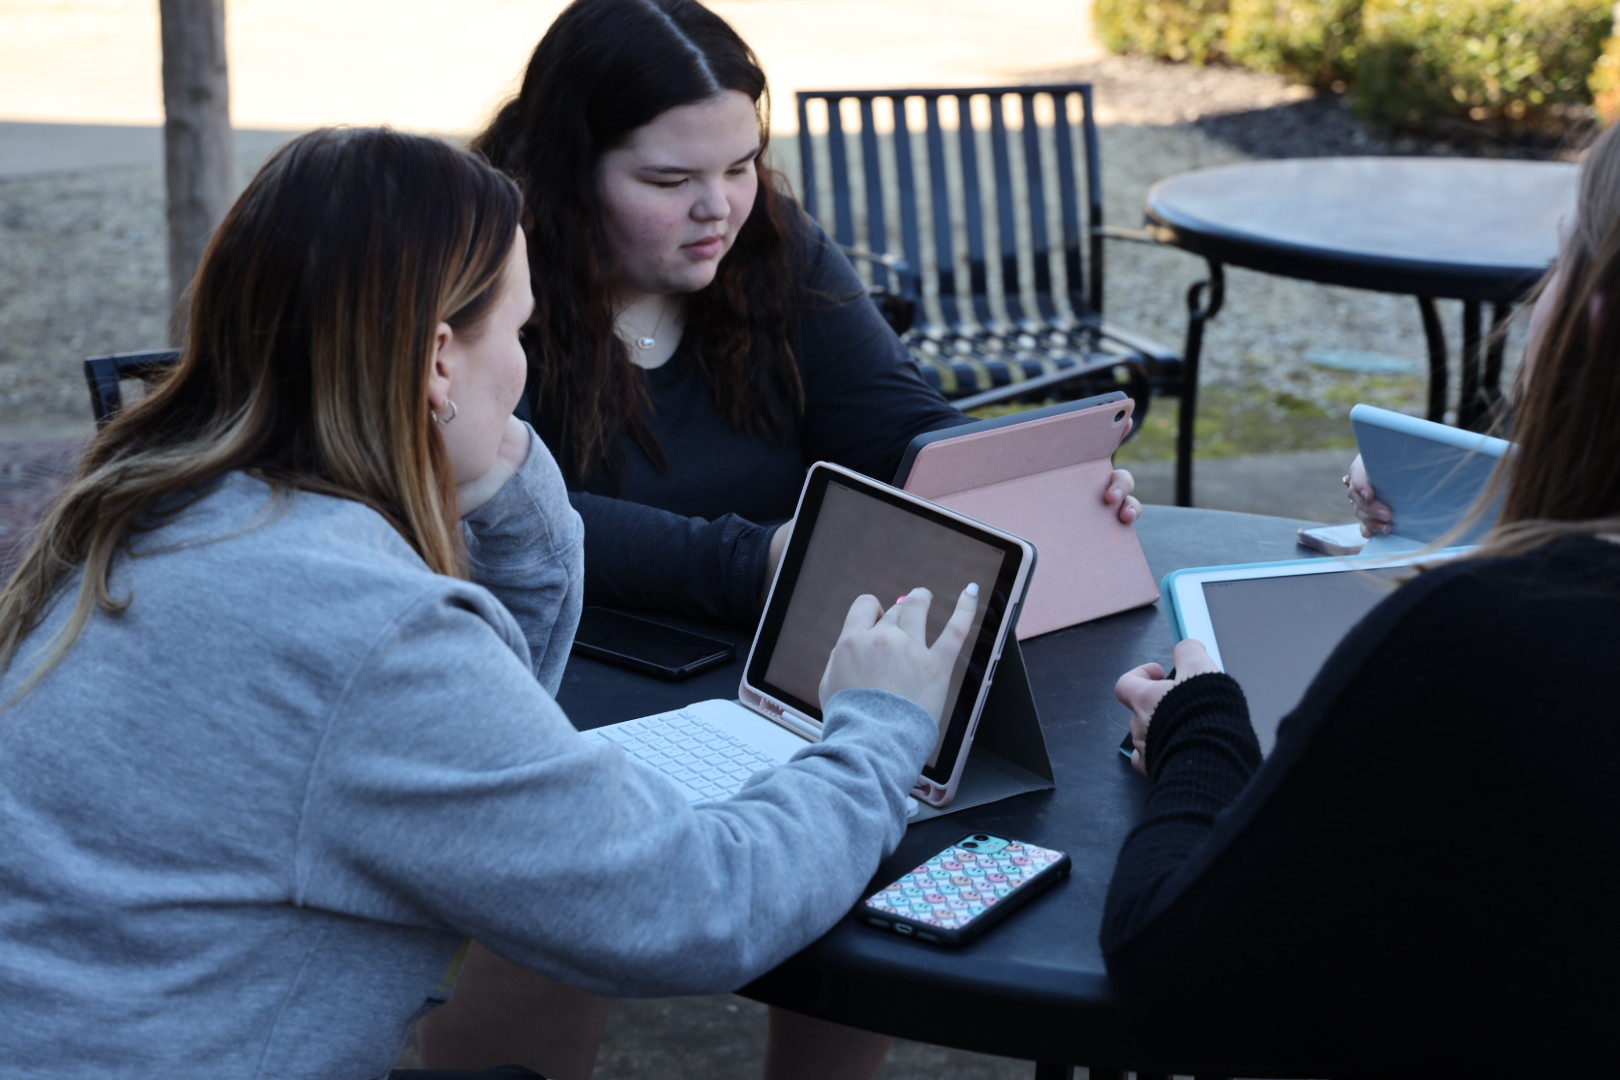 Students studying outside the Union with iPads.